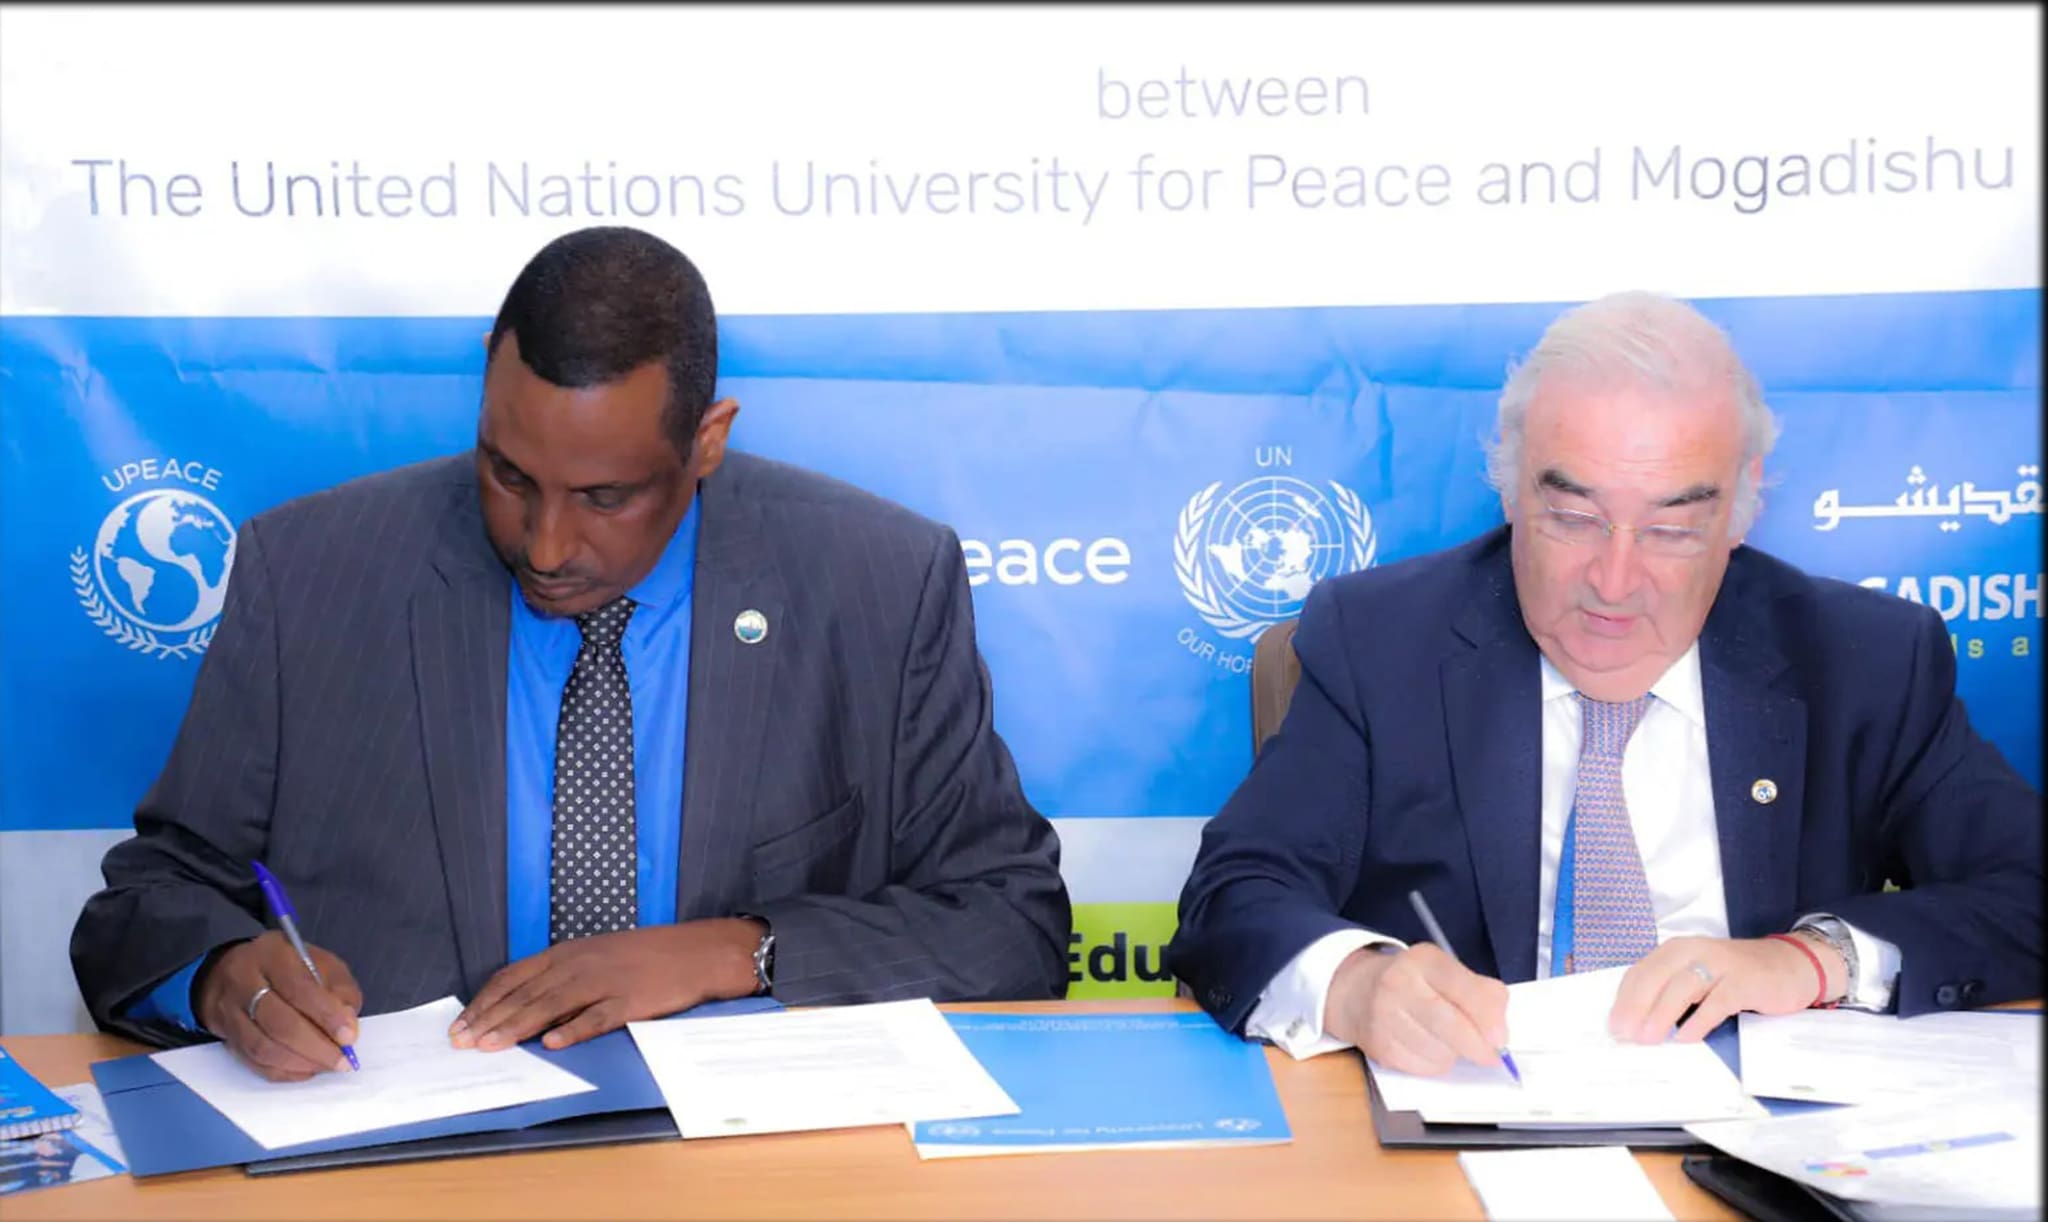 Mogadishu University and United Nations University for peace have inked a deal on research and peace studies